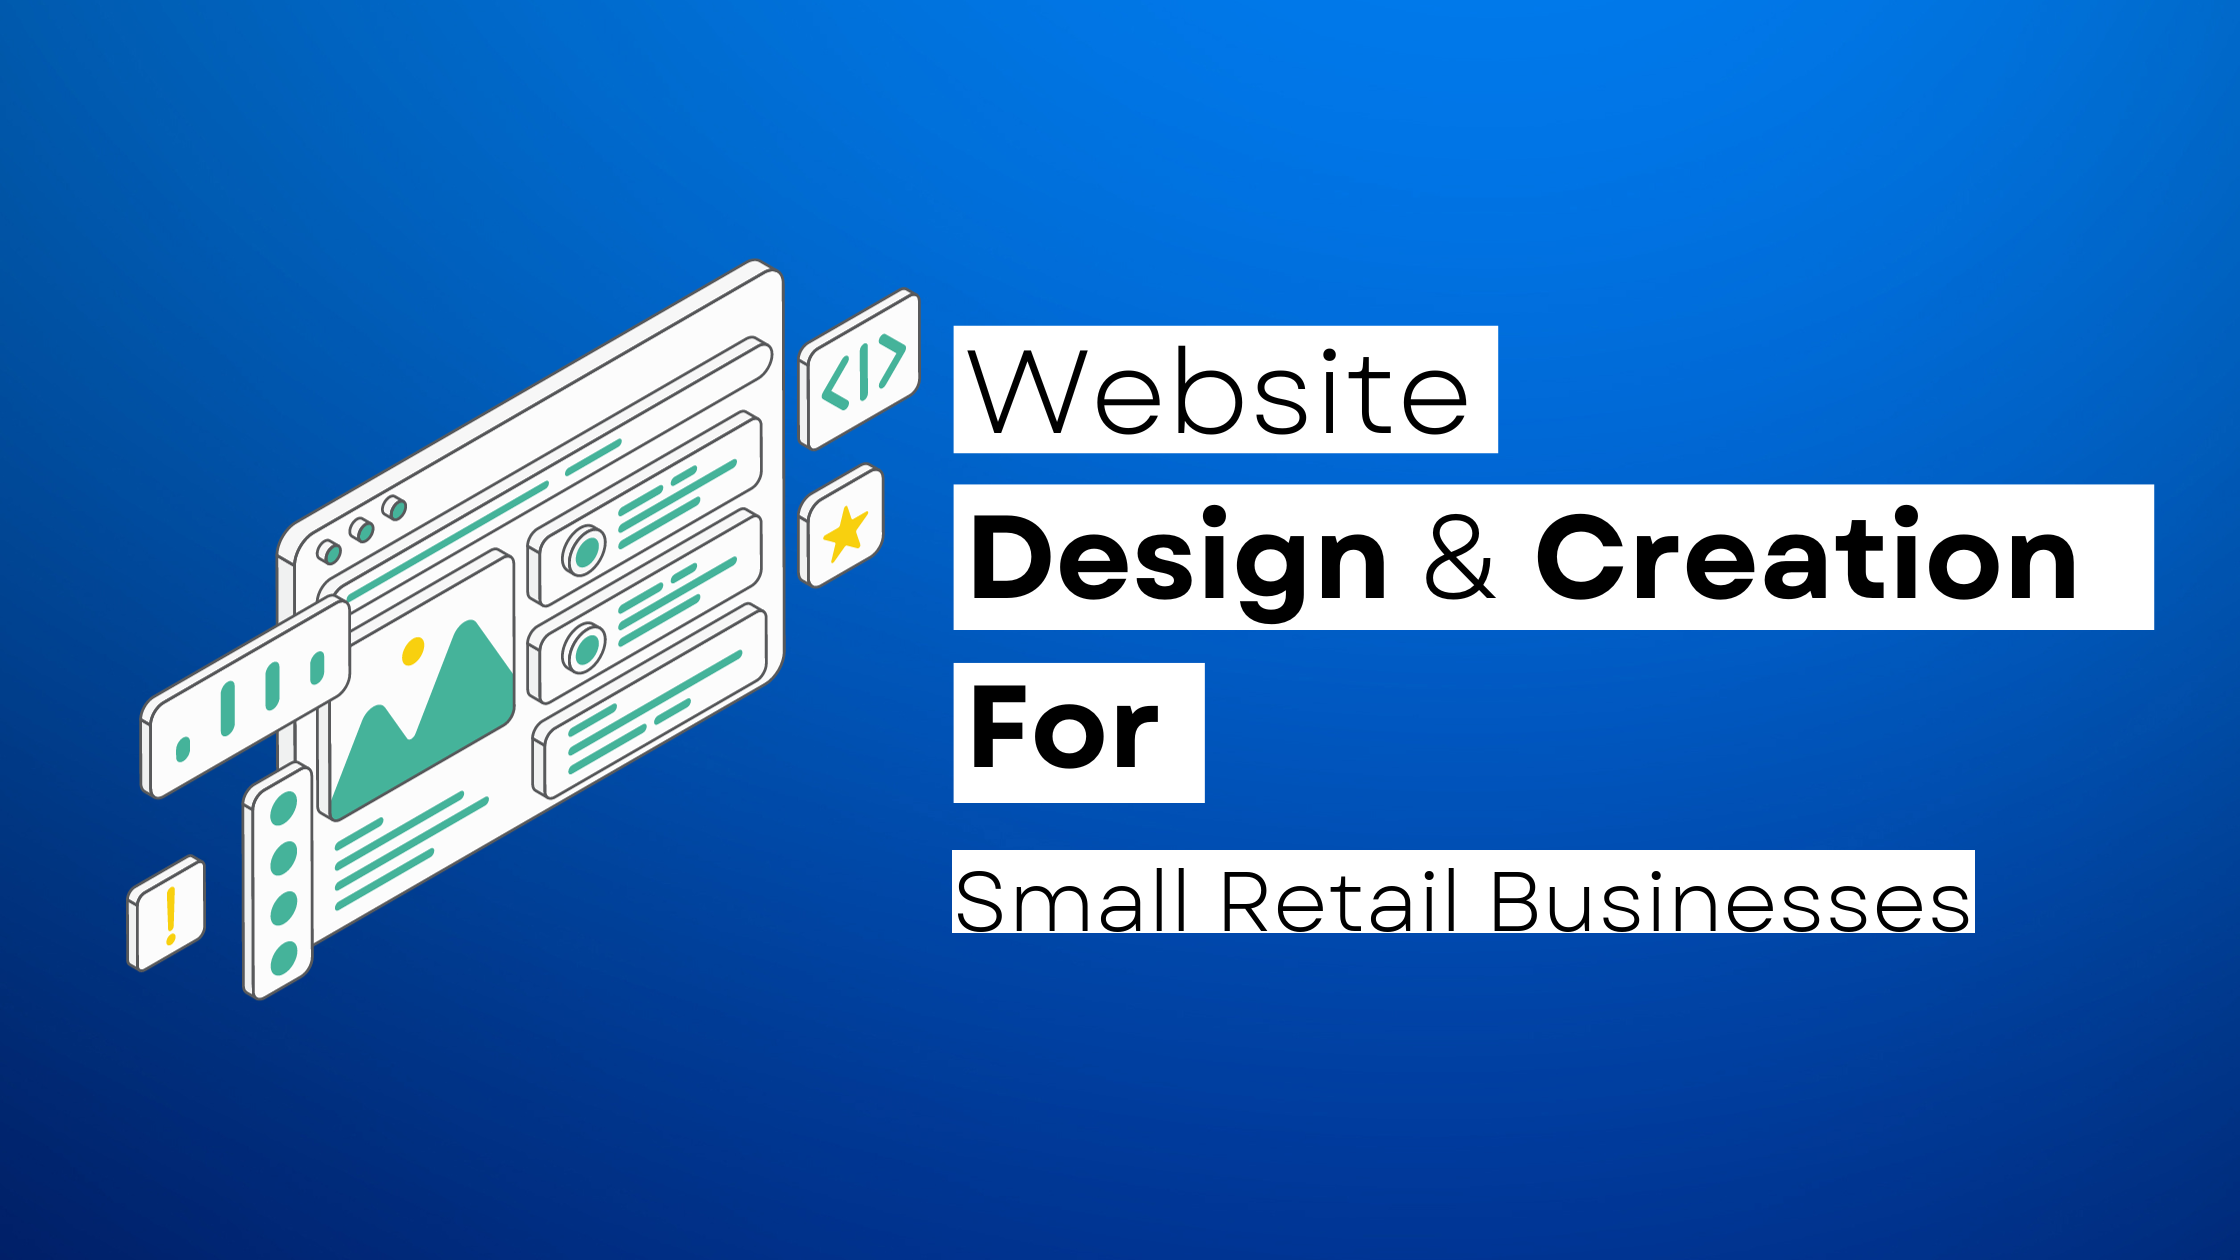 How to start a Small Retail website